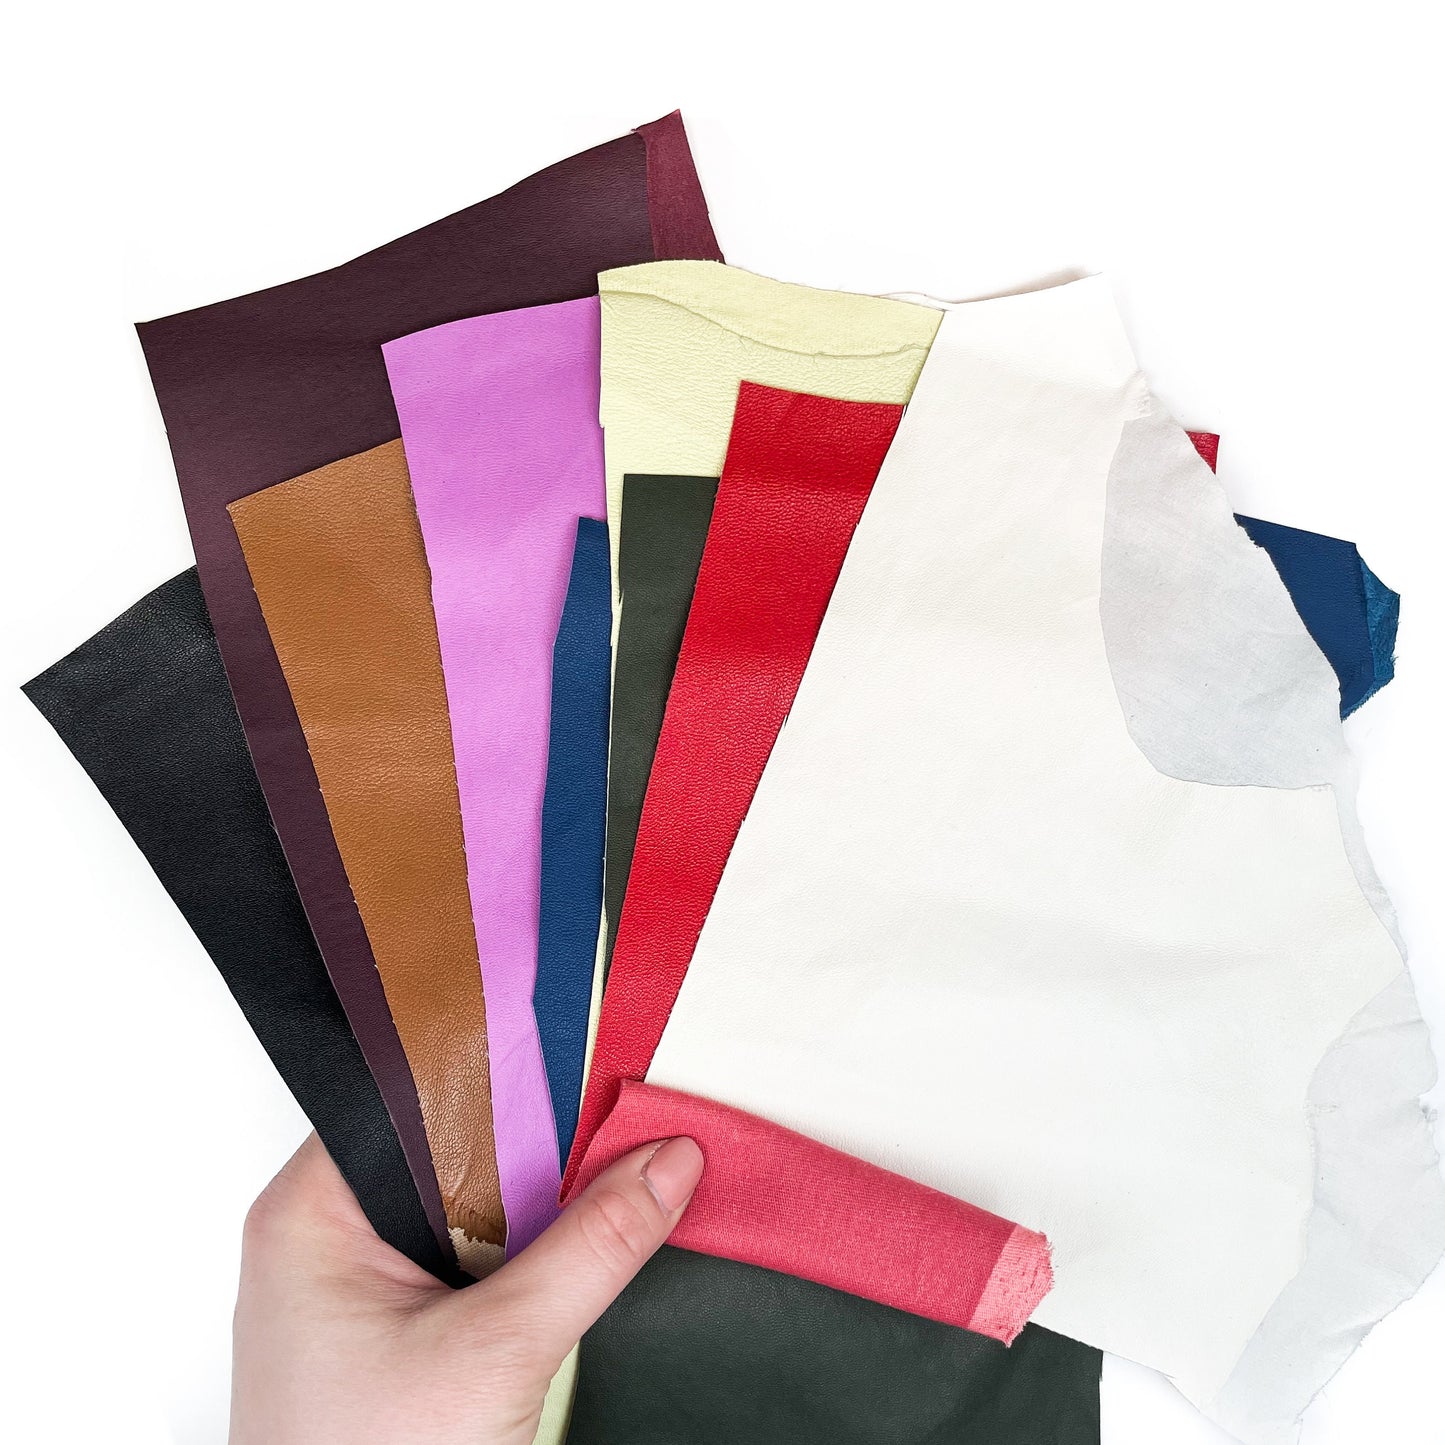 Stretch Leather Scraps Mix Thin Elastic Fabric On Cotton Colorful Leather